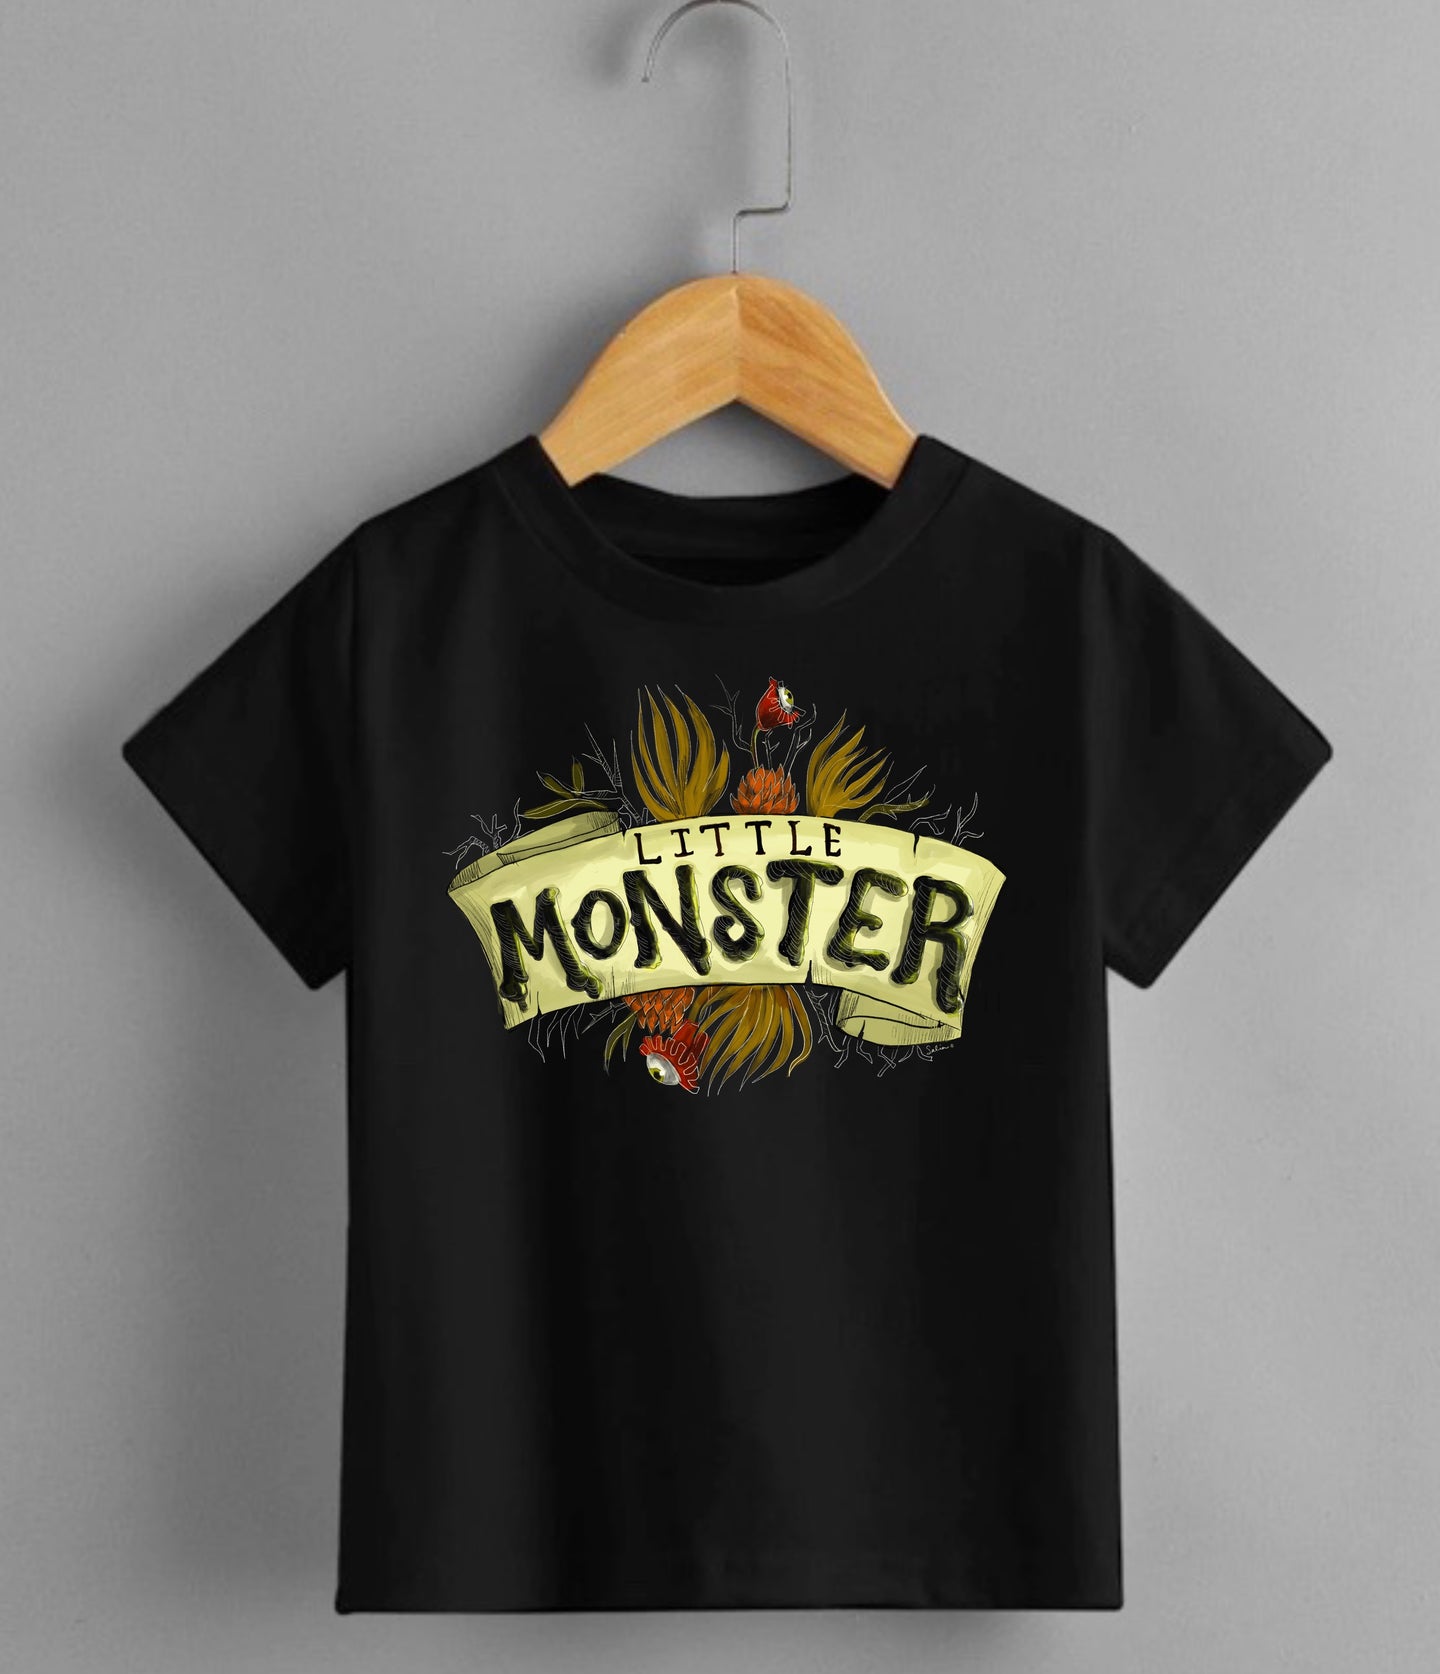 Little Monster- Classic Edition - Black - Children's Tee [READY TO SHIP]